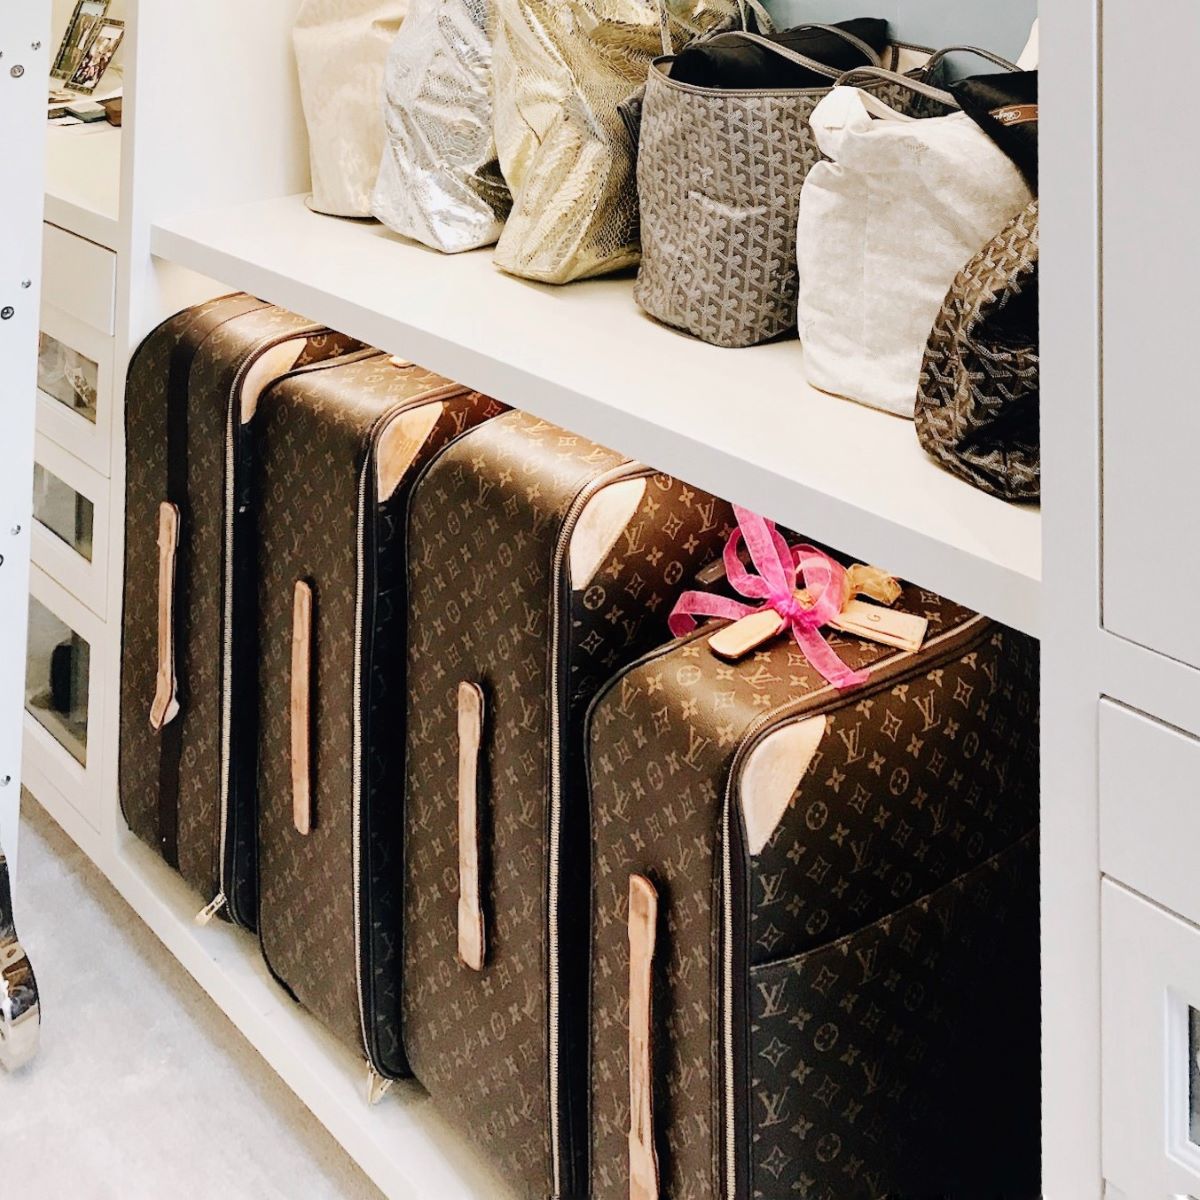 How To Store Suitcases In Closet